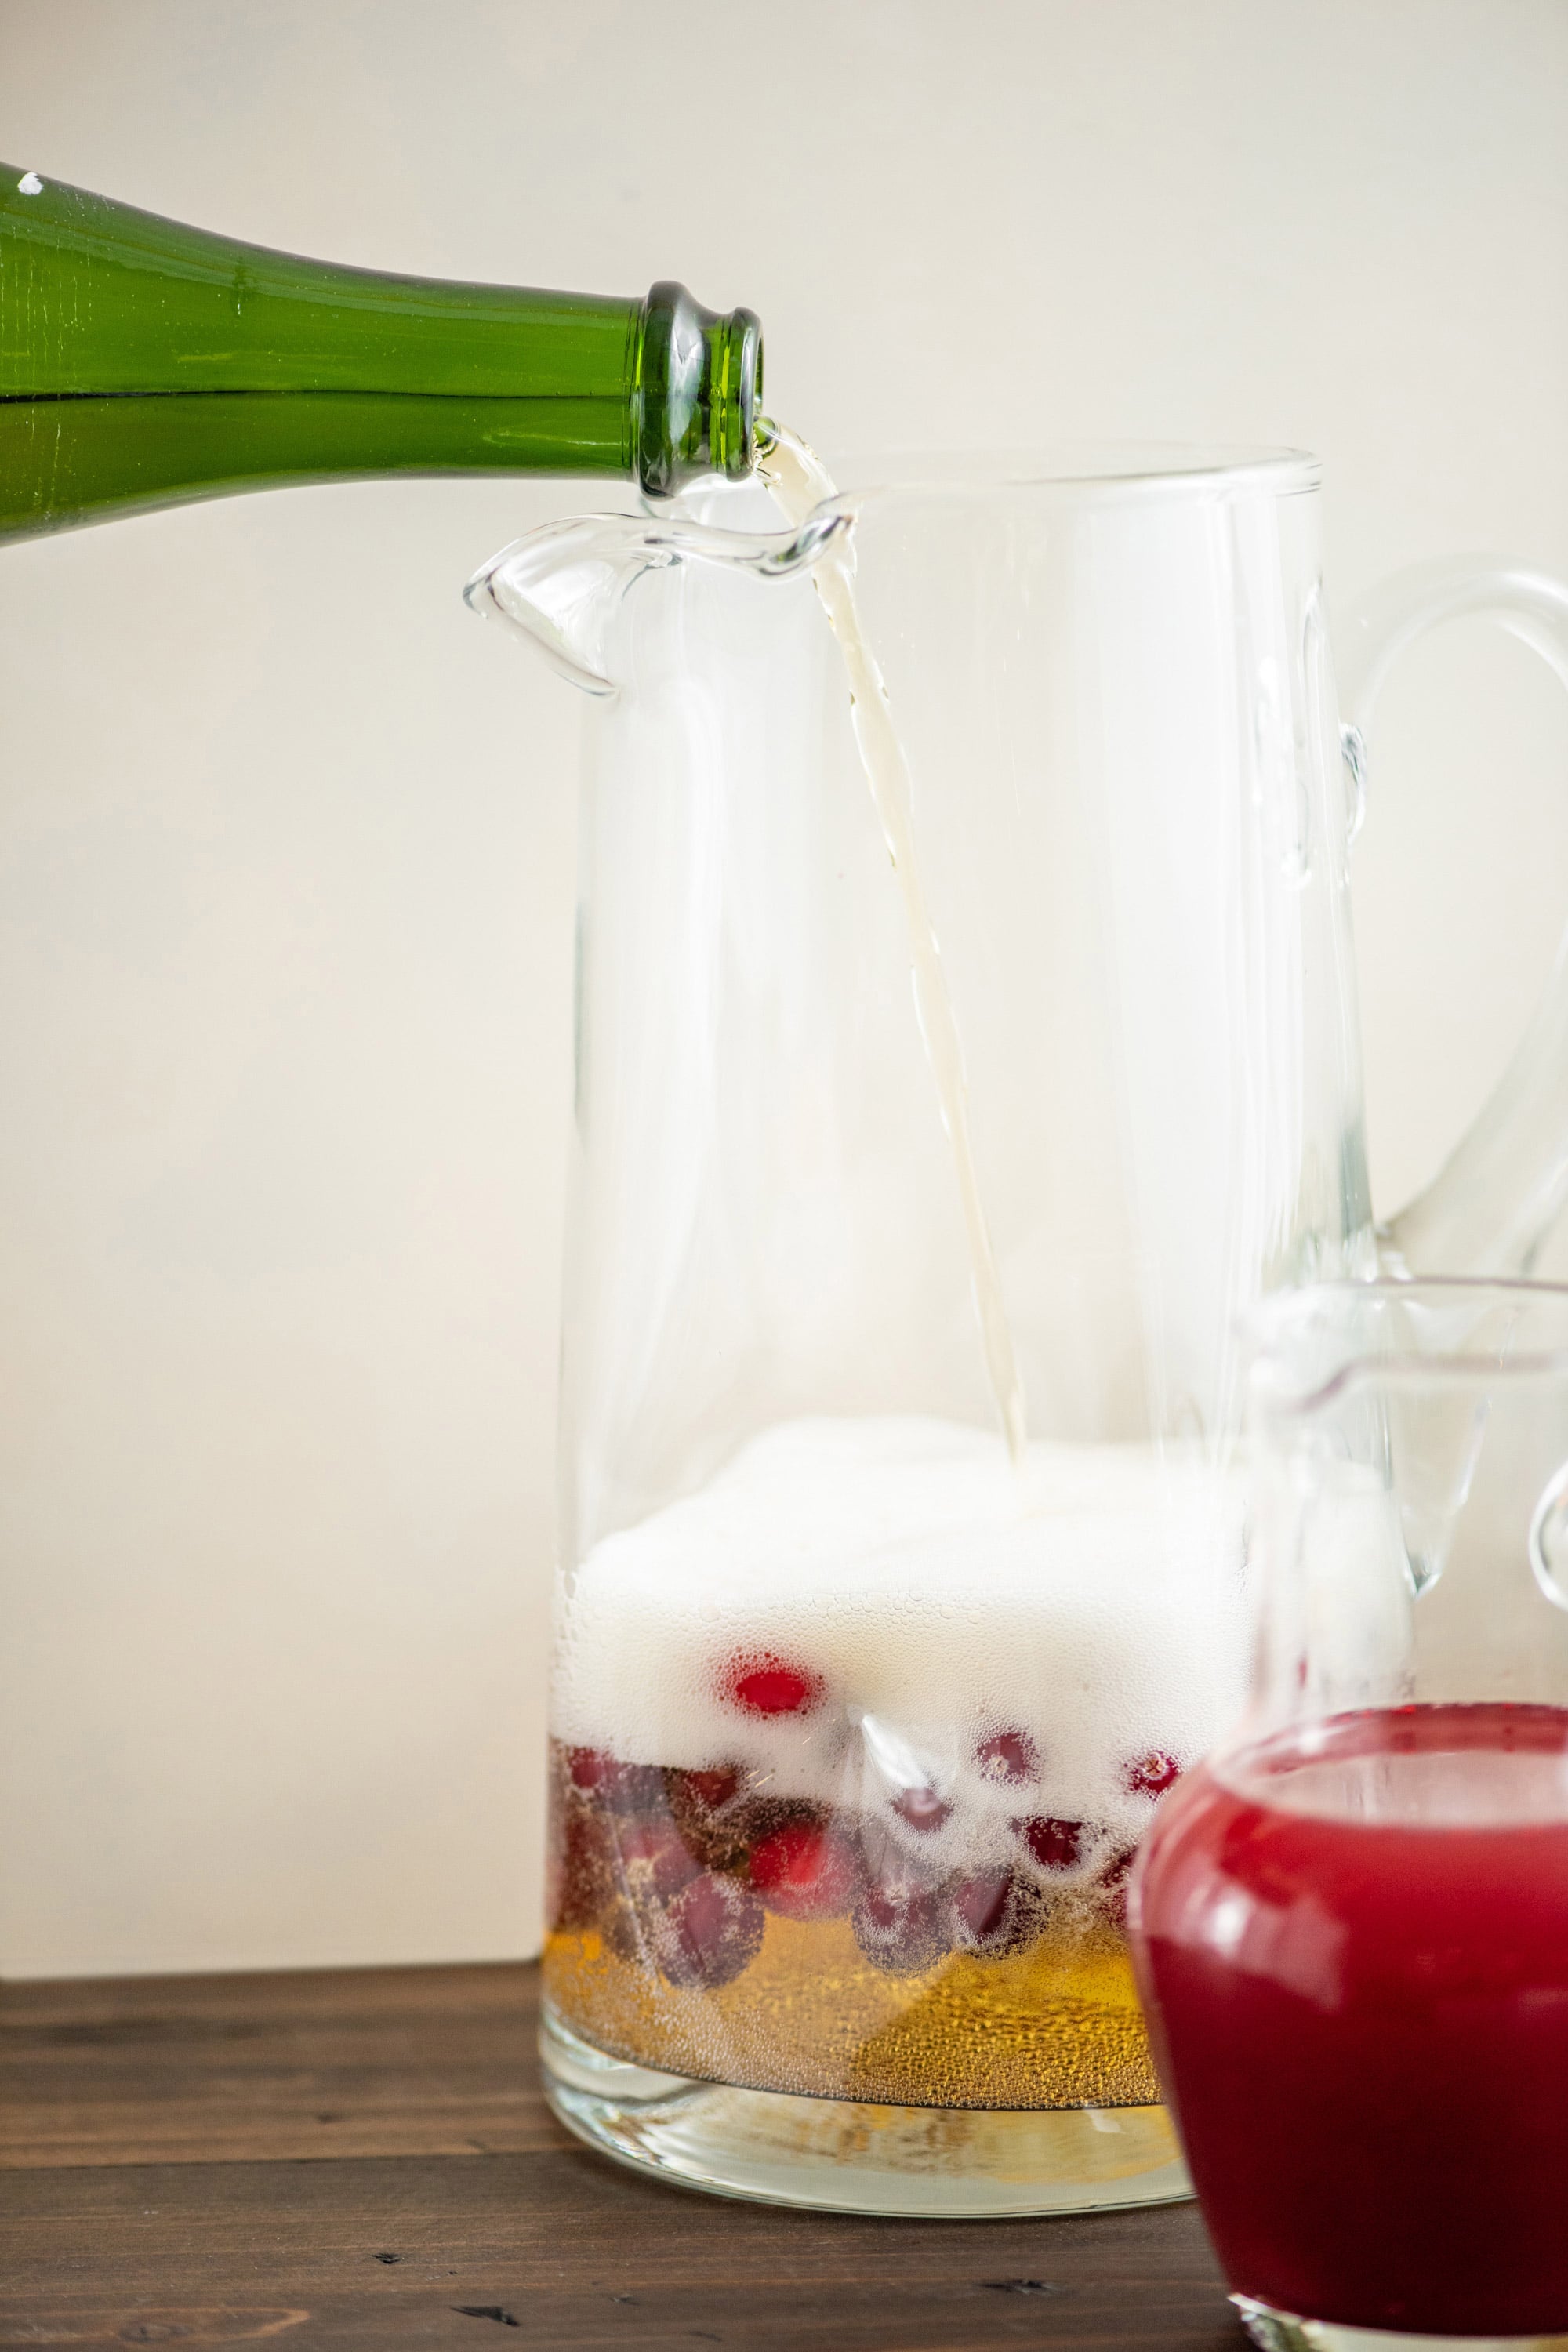 Sparking wine being poured into a pitcher with cranberries in it.